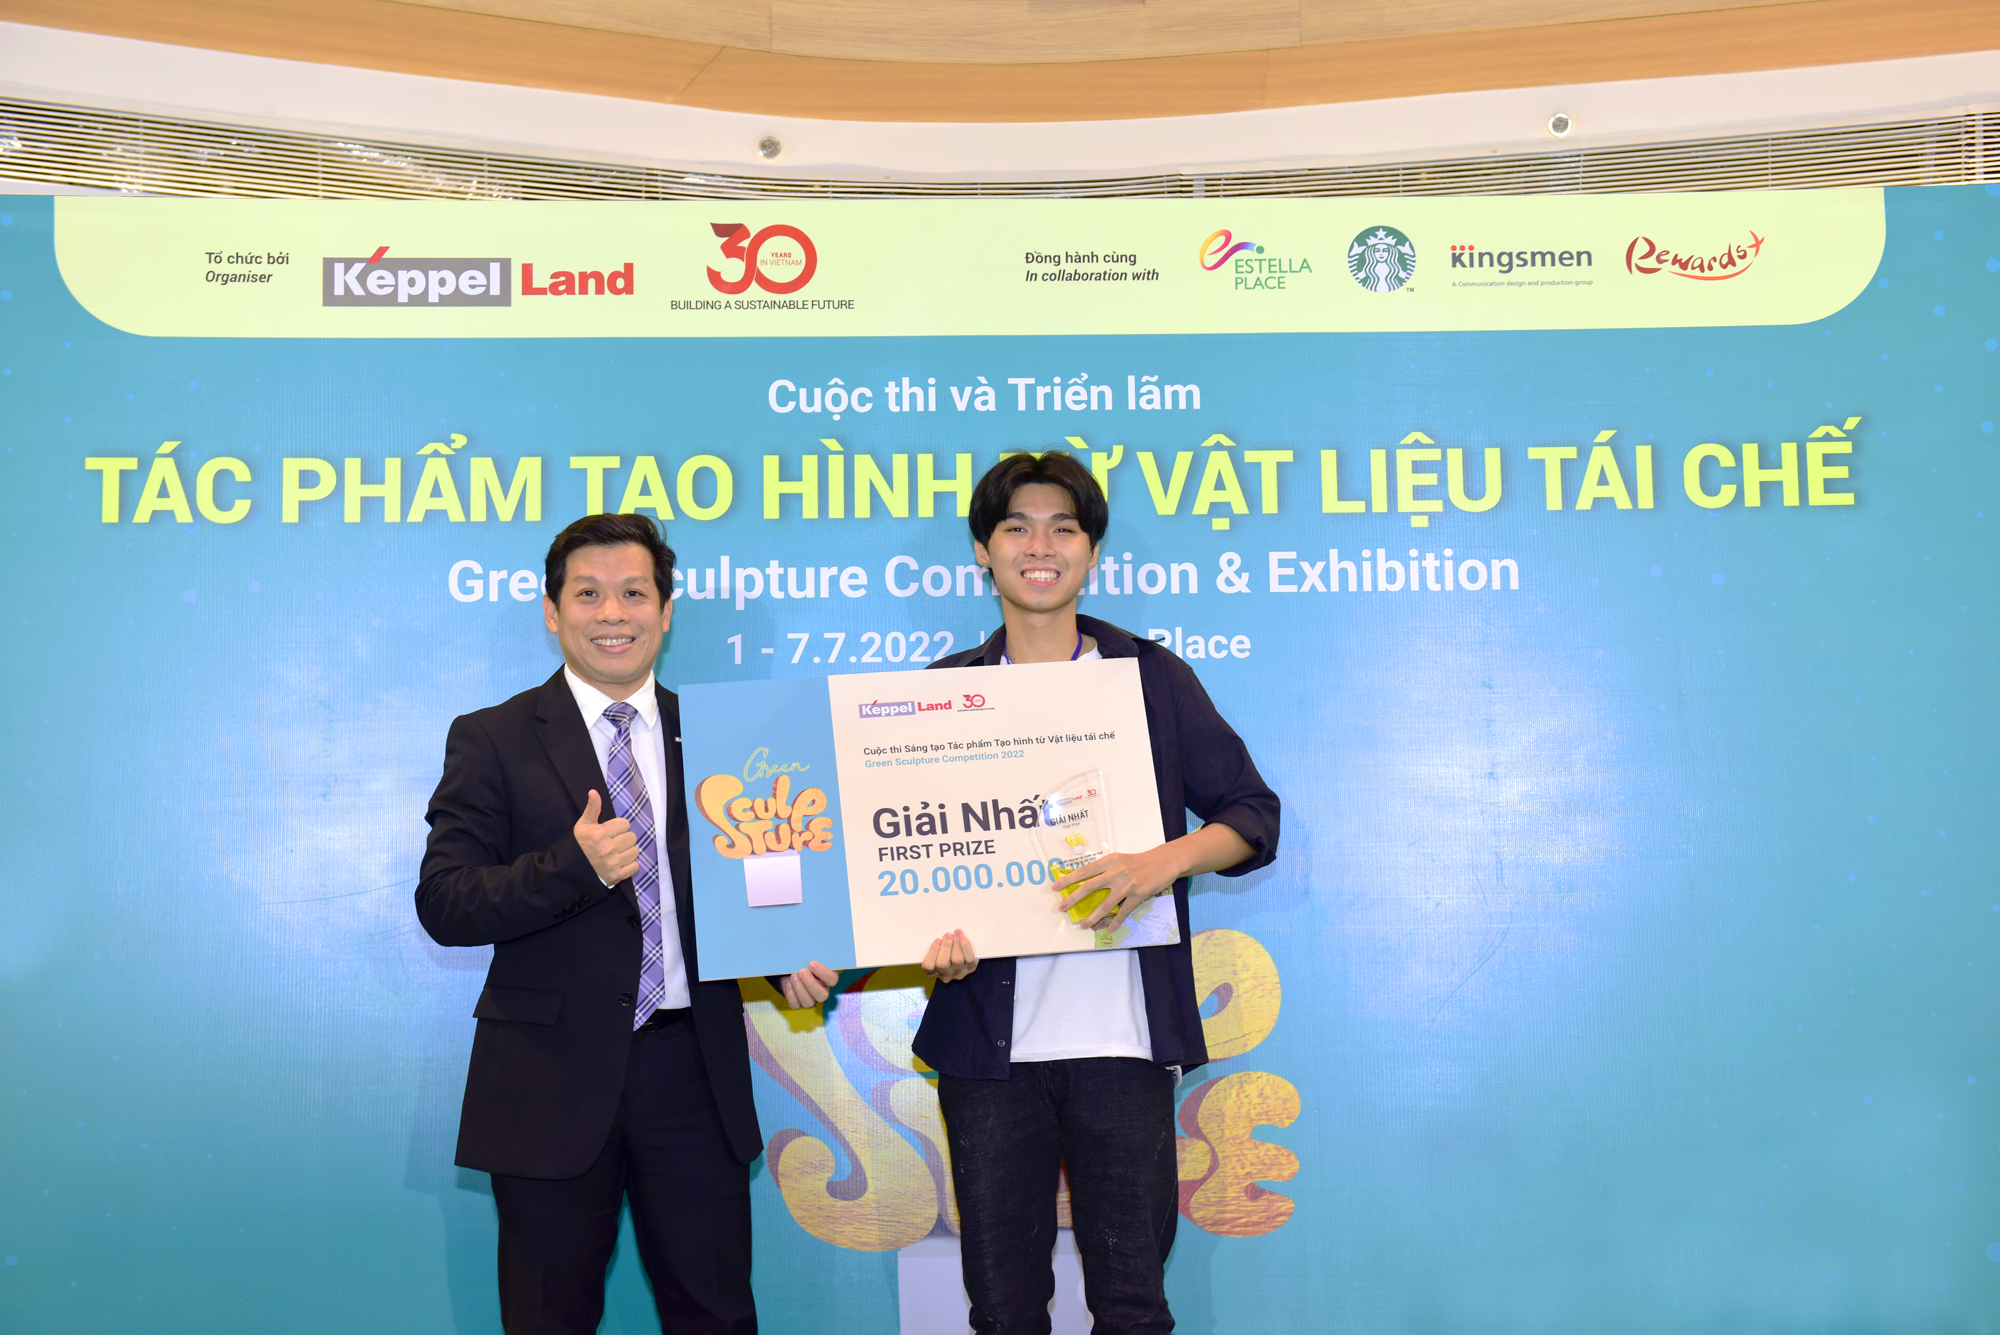 Mr Lee Leong Seng, General Director of Saigon Sports City Company Limited, presenting the award to the winner of the Green Sculpture Competition.